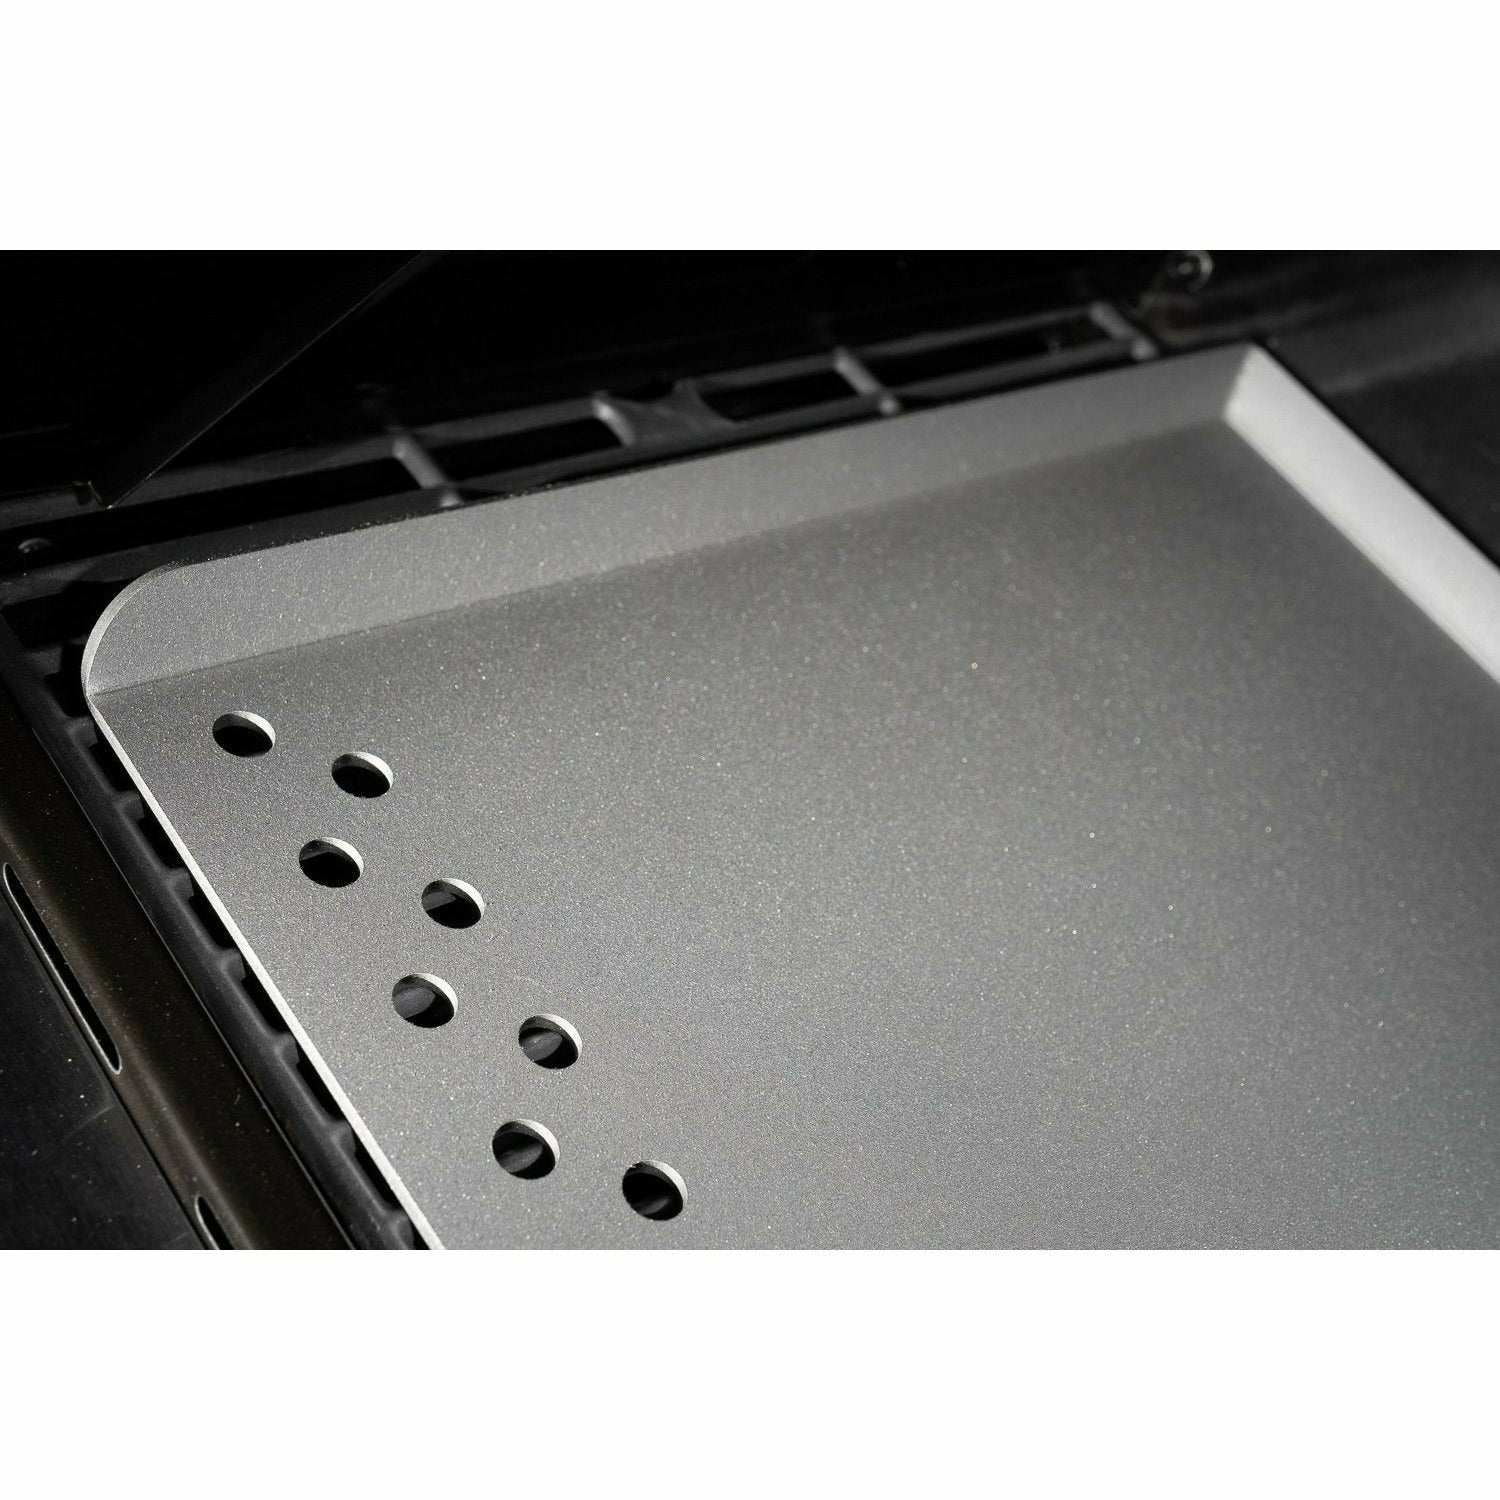 VEVOR 18 x 16 Stainless Steel Griddle Flat Top Grill Griddle for Triple BBQ Stove